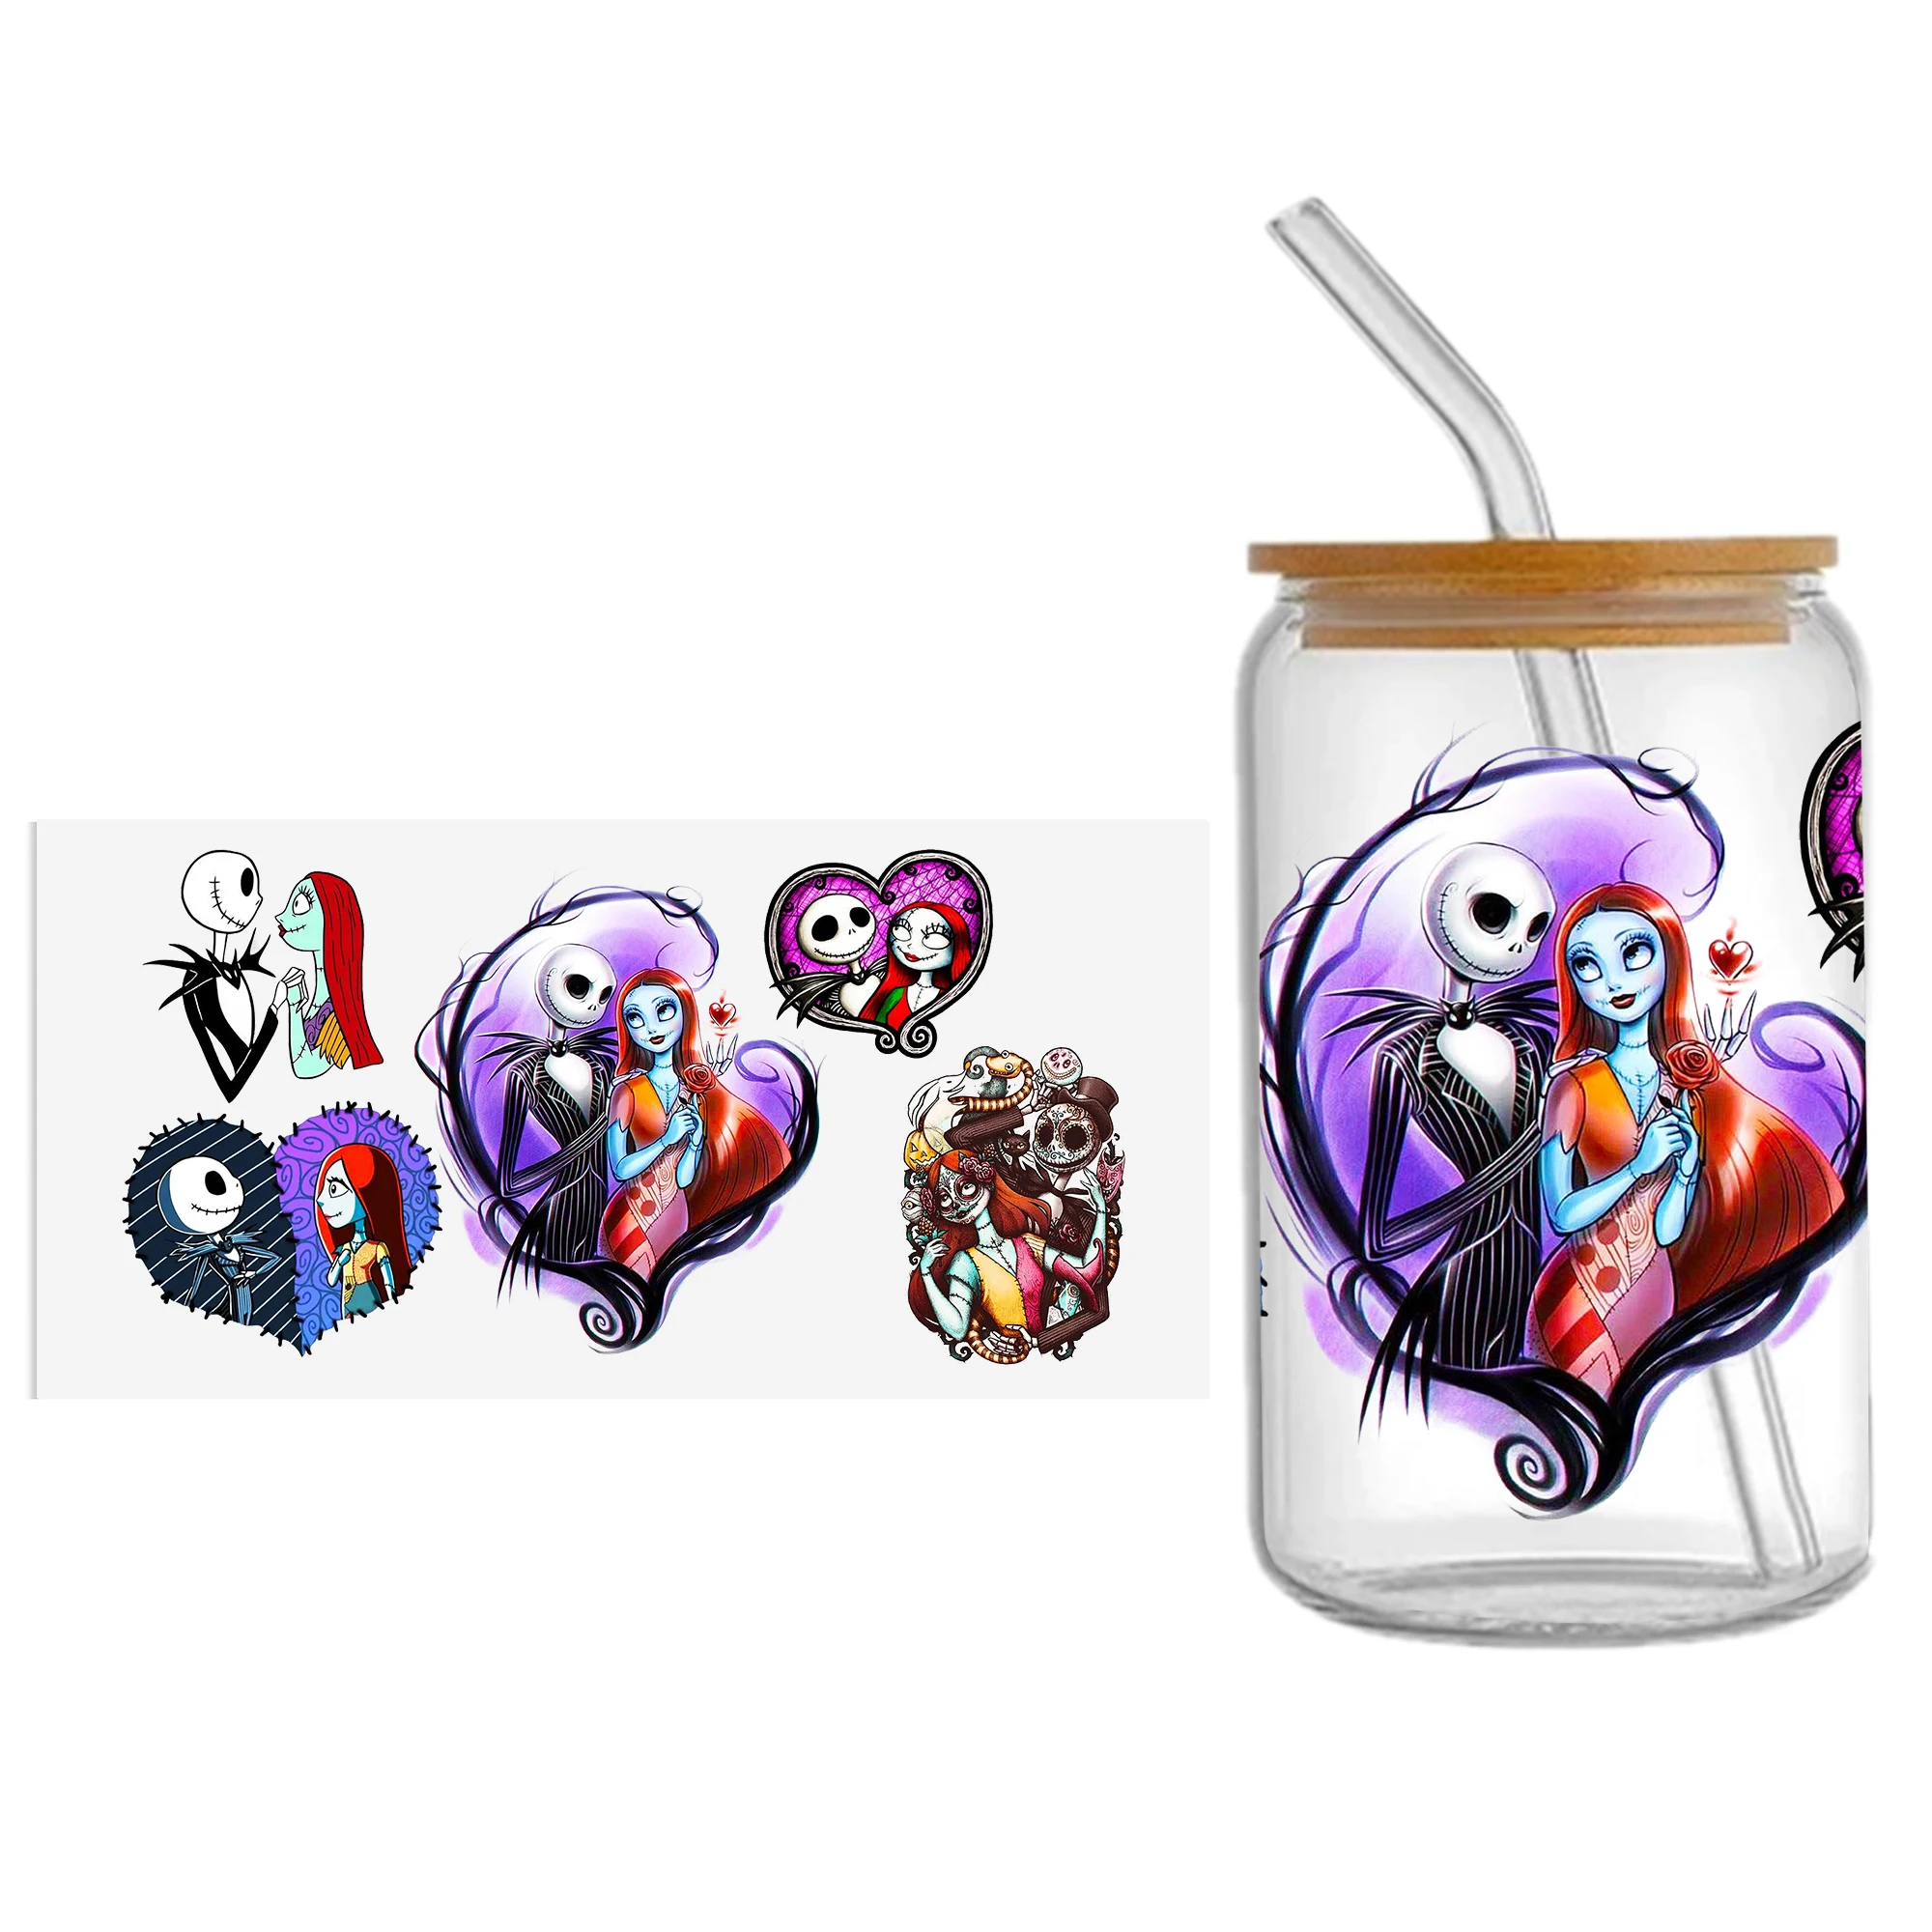 https://ae01.alicdn.com/kf/S656beec56be24d2db9814f1ac66b2337e/Disney-the-nightmare-before-Christmas-Stitch-UV-DTF-Sticker-For-16oz-Cups-Wrap-Transfer-Sticker-Labels.jpg